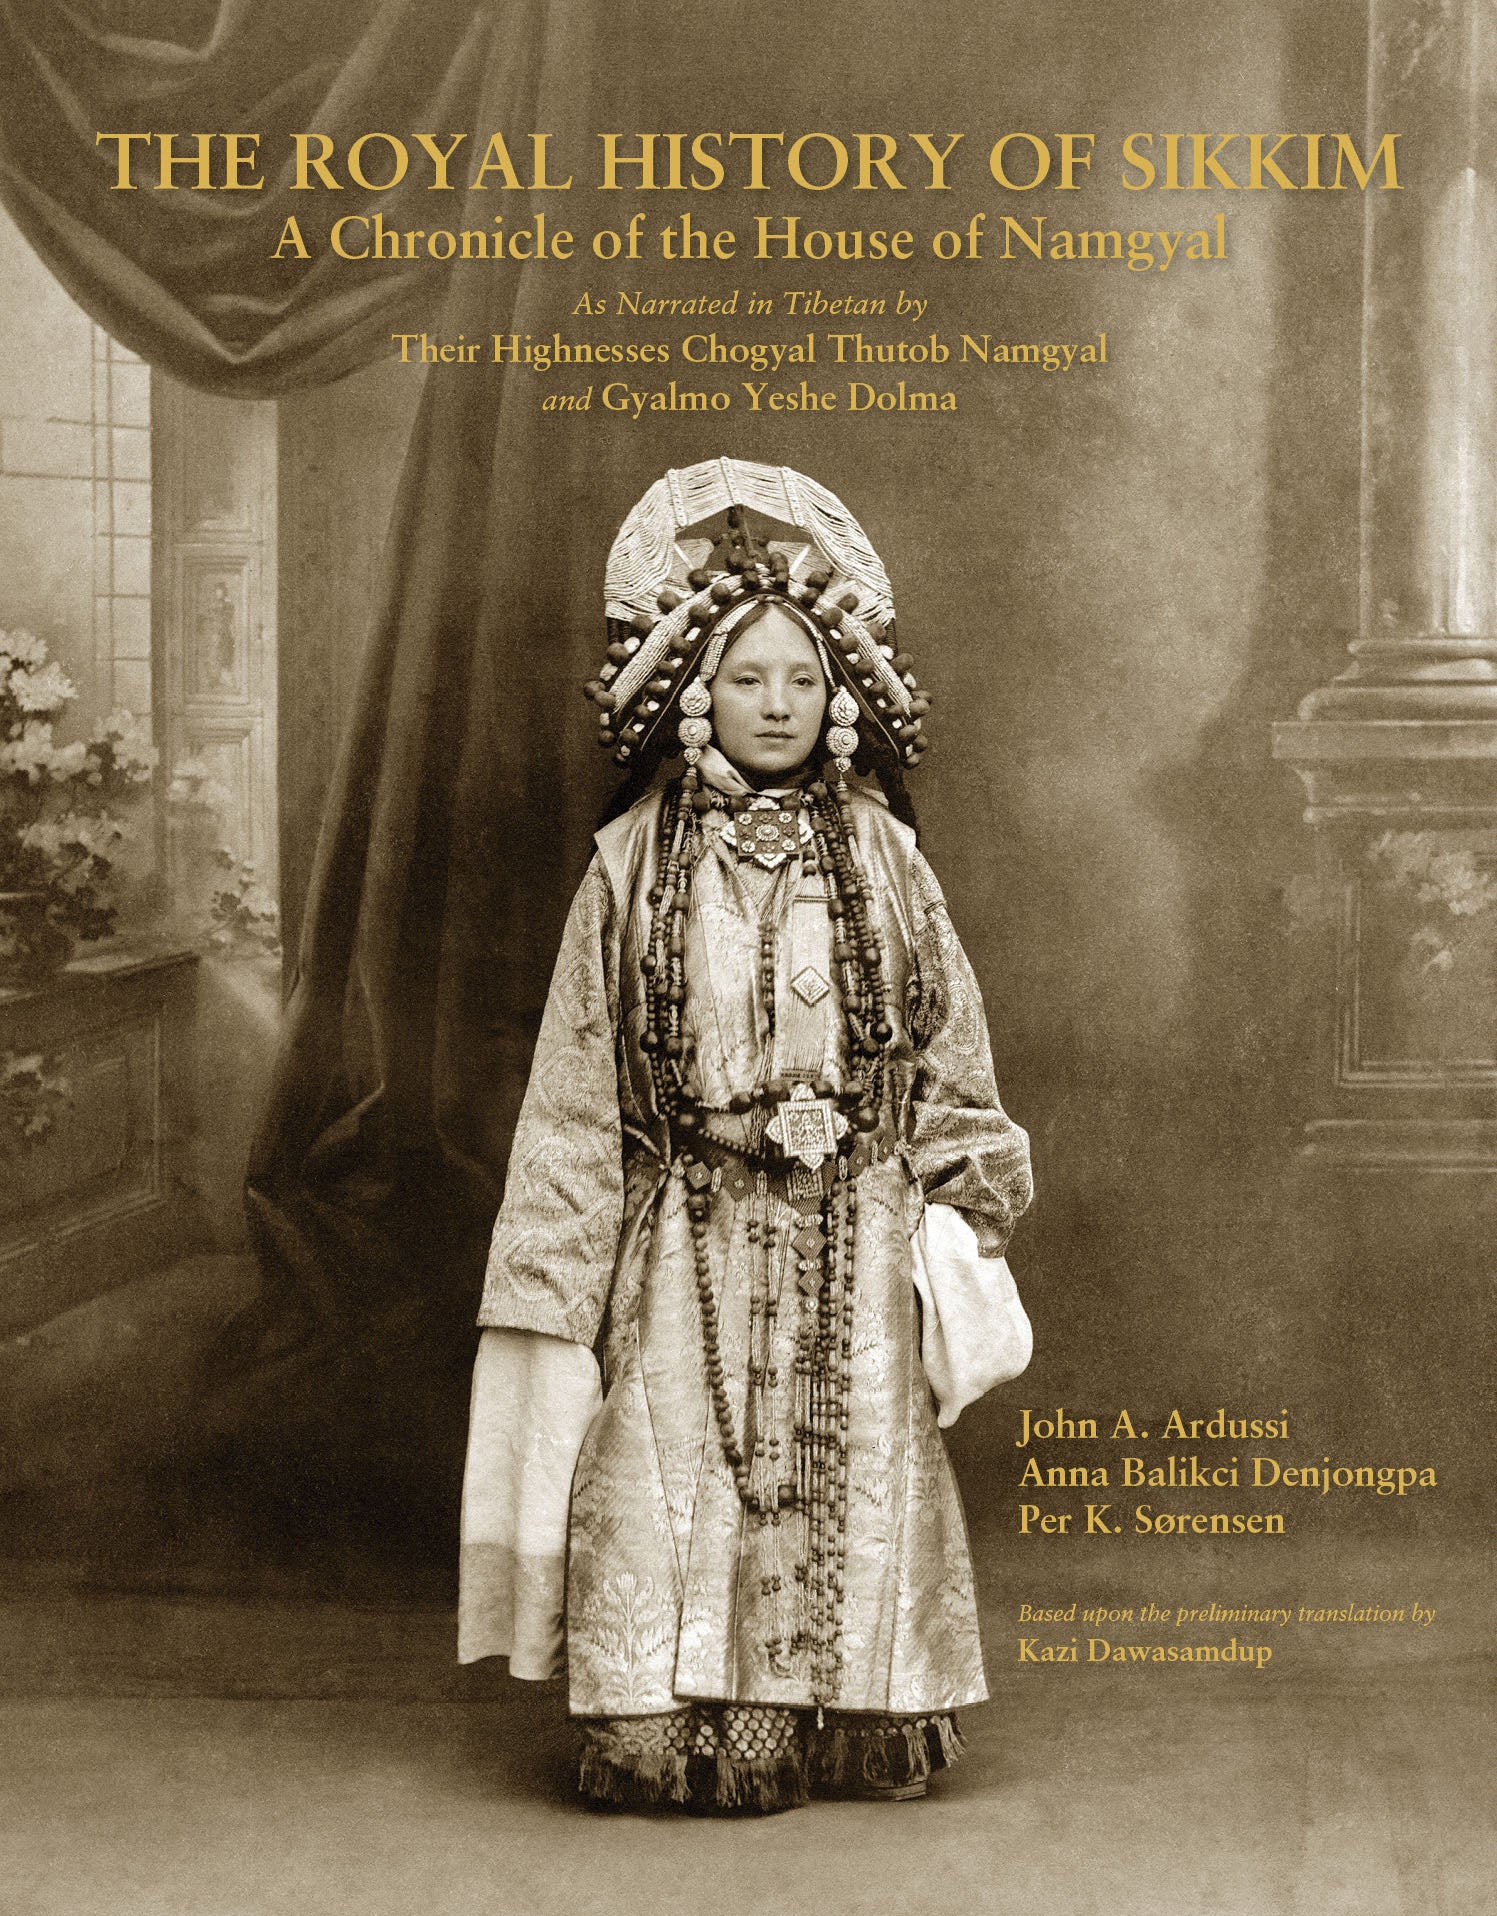 the　Namgyal　Publications　HISTORY　ROYAL　–　SIKKIM:　A　of　Chronicle　of　House　Serindia　THE　OF